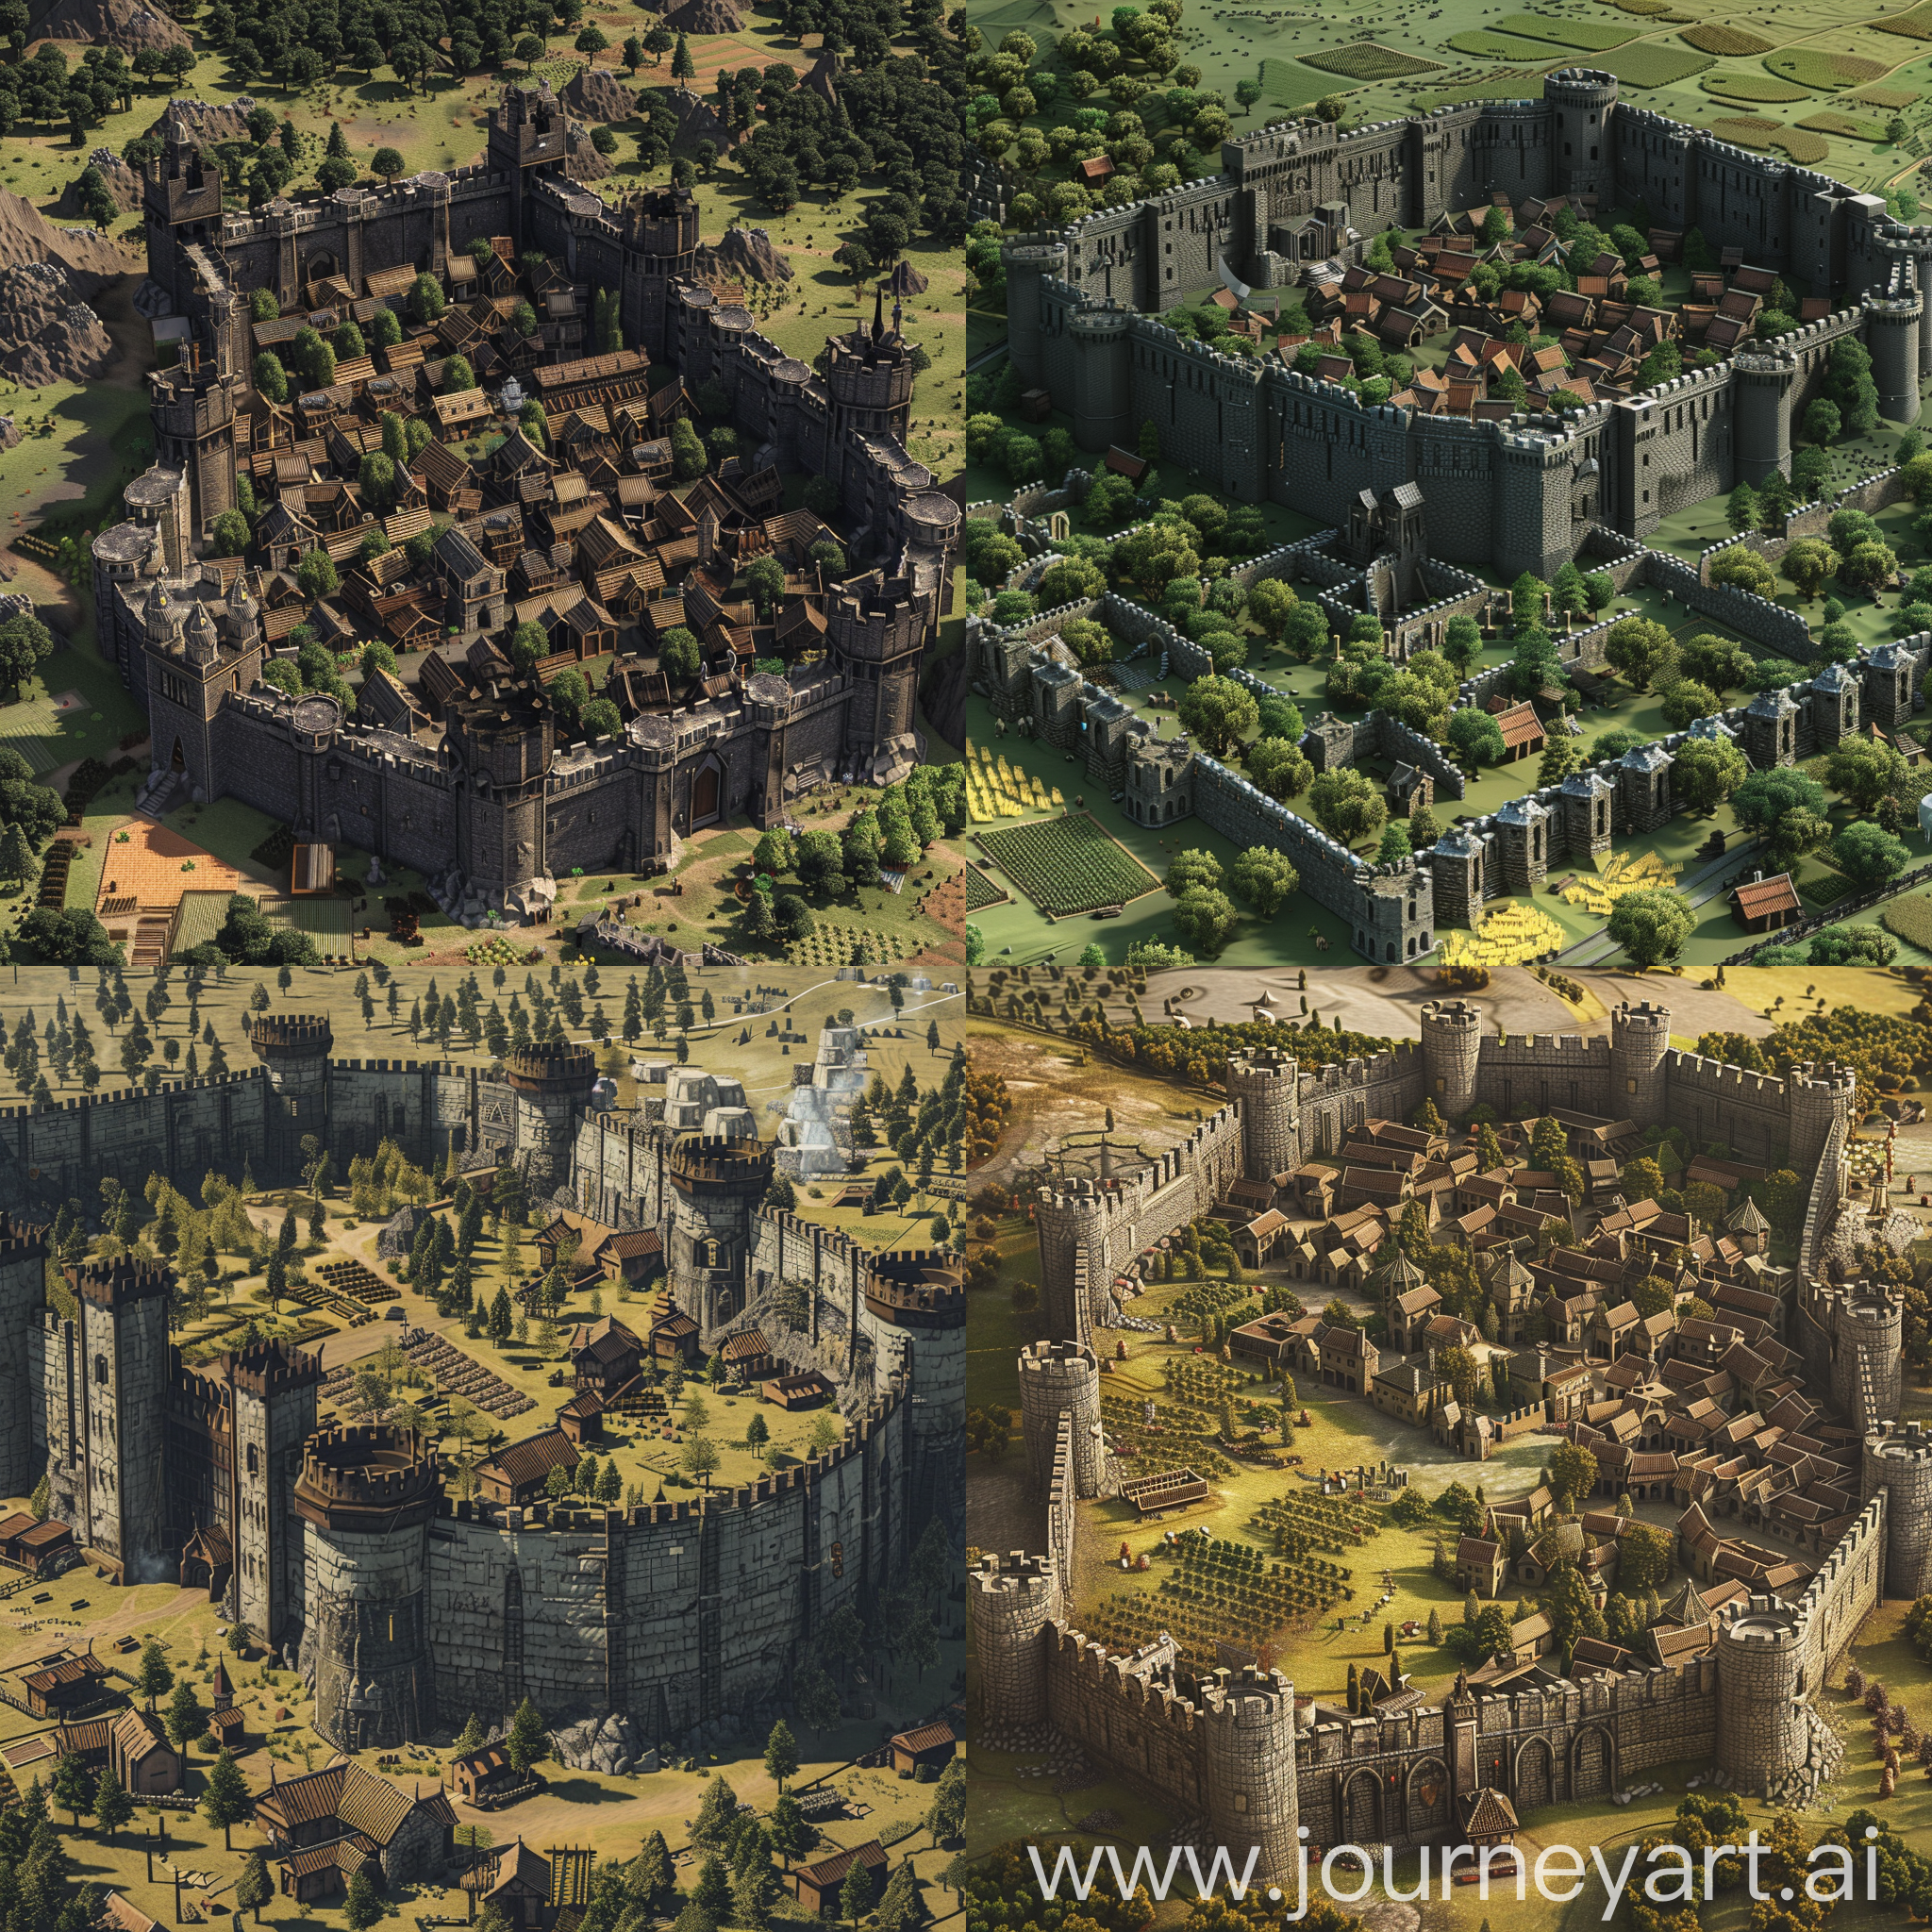 dnd,dark fantasy theme,a very big medieval city with walls.Around walls there are some farms and trees.